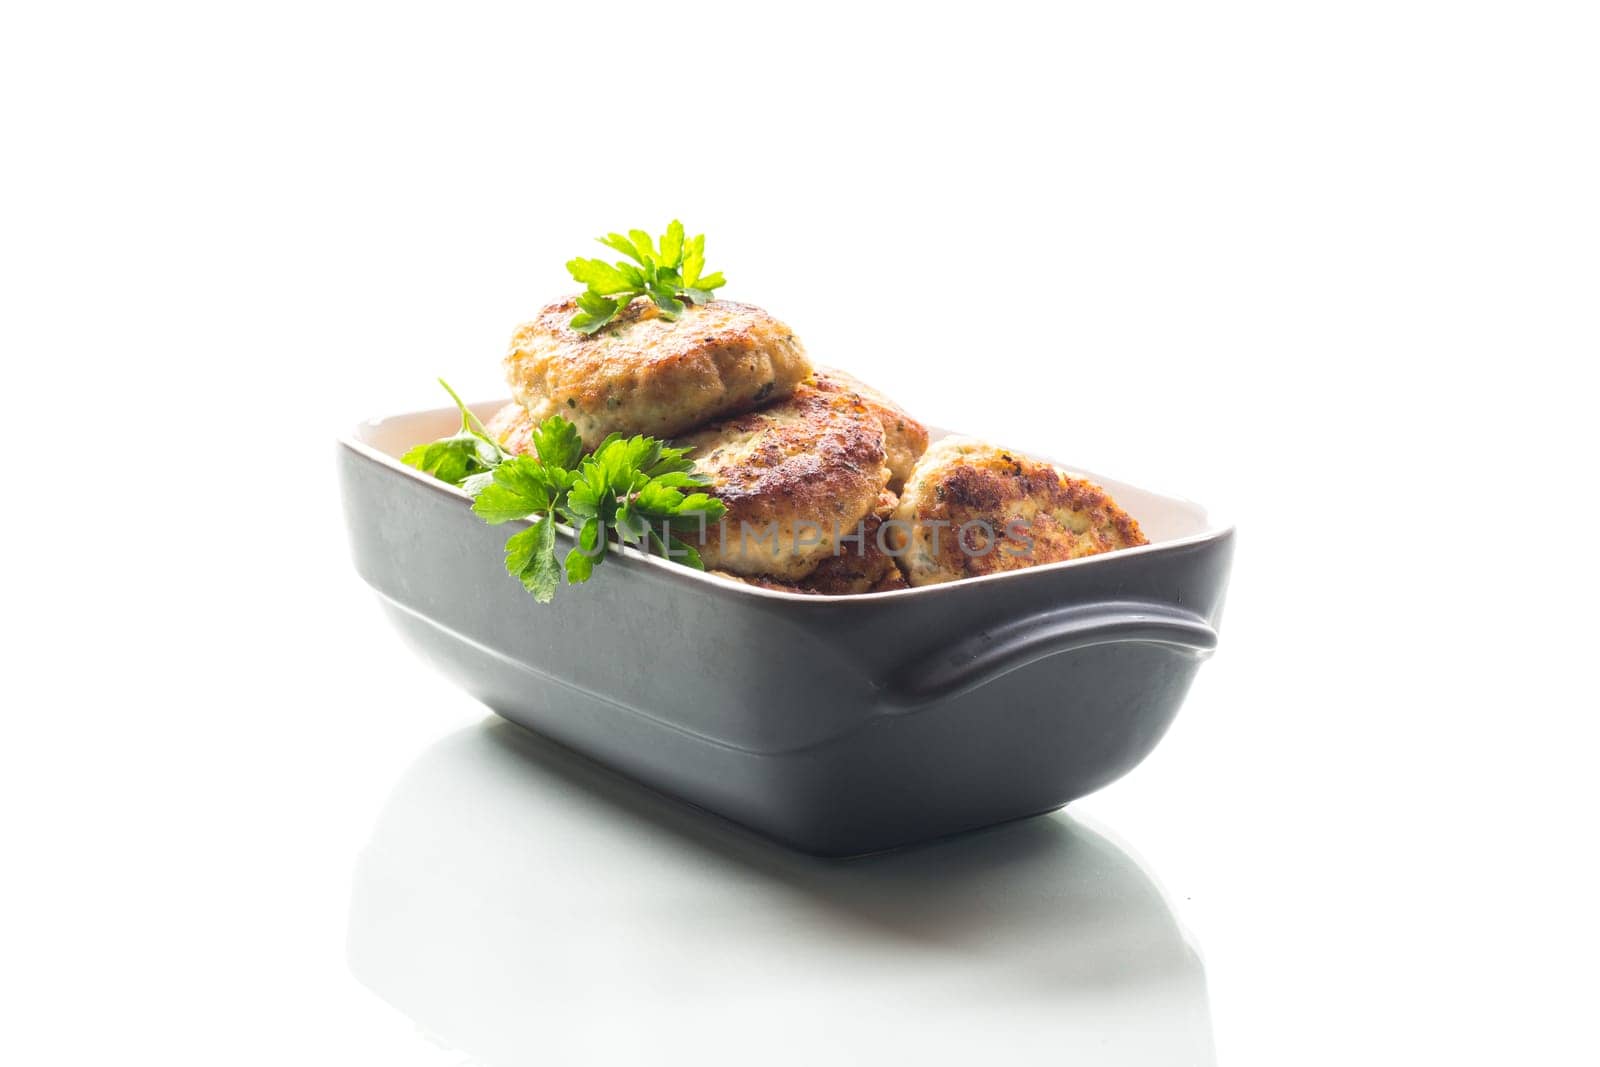 fried meat cutlets in a ceramic form on a wooden table .